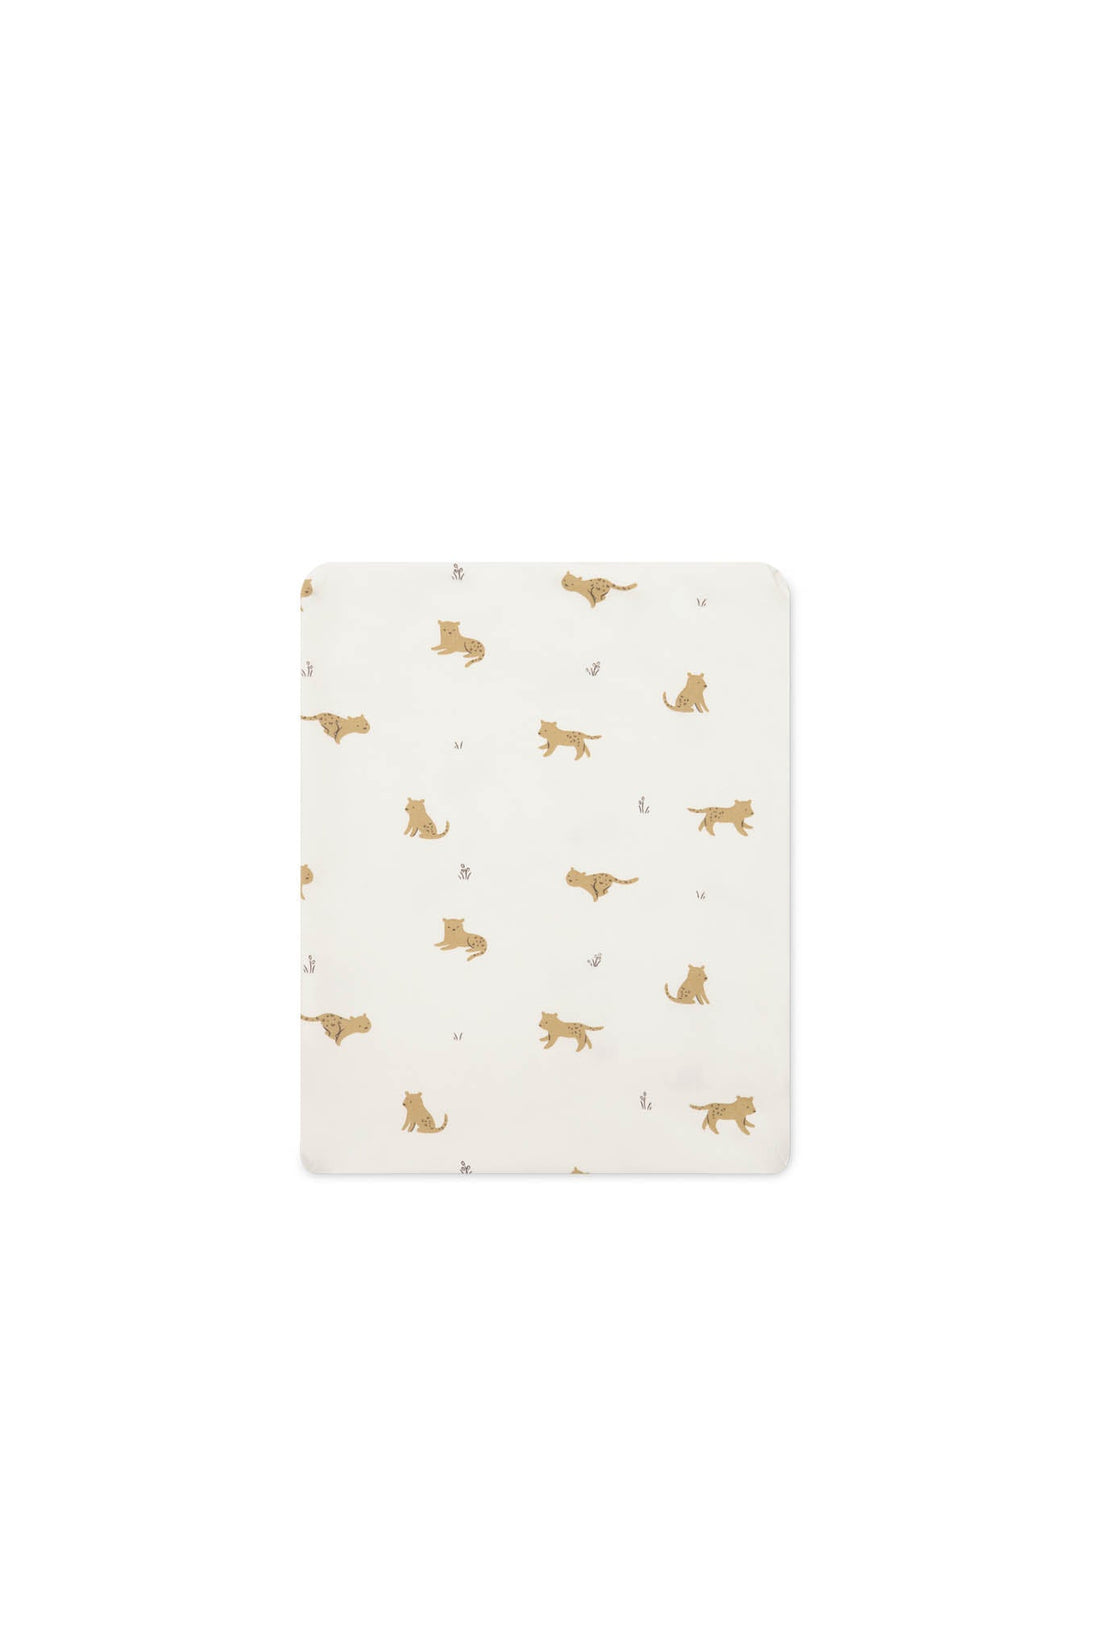 Organic Cotton Cot Sheet - Lenny Leopard Cloud Childrens Bedding from Jamie Kay USA